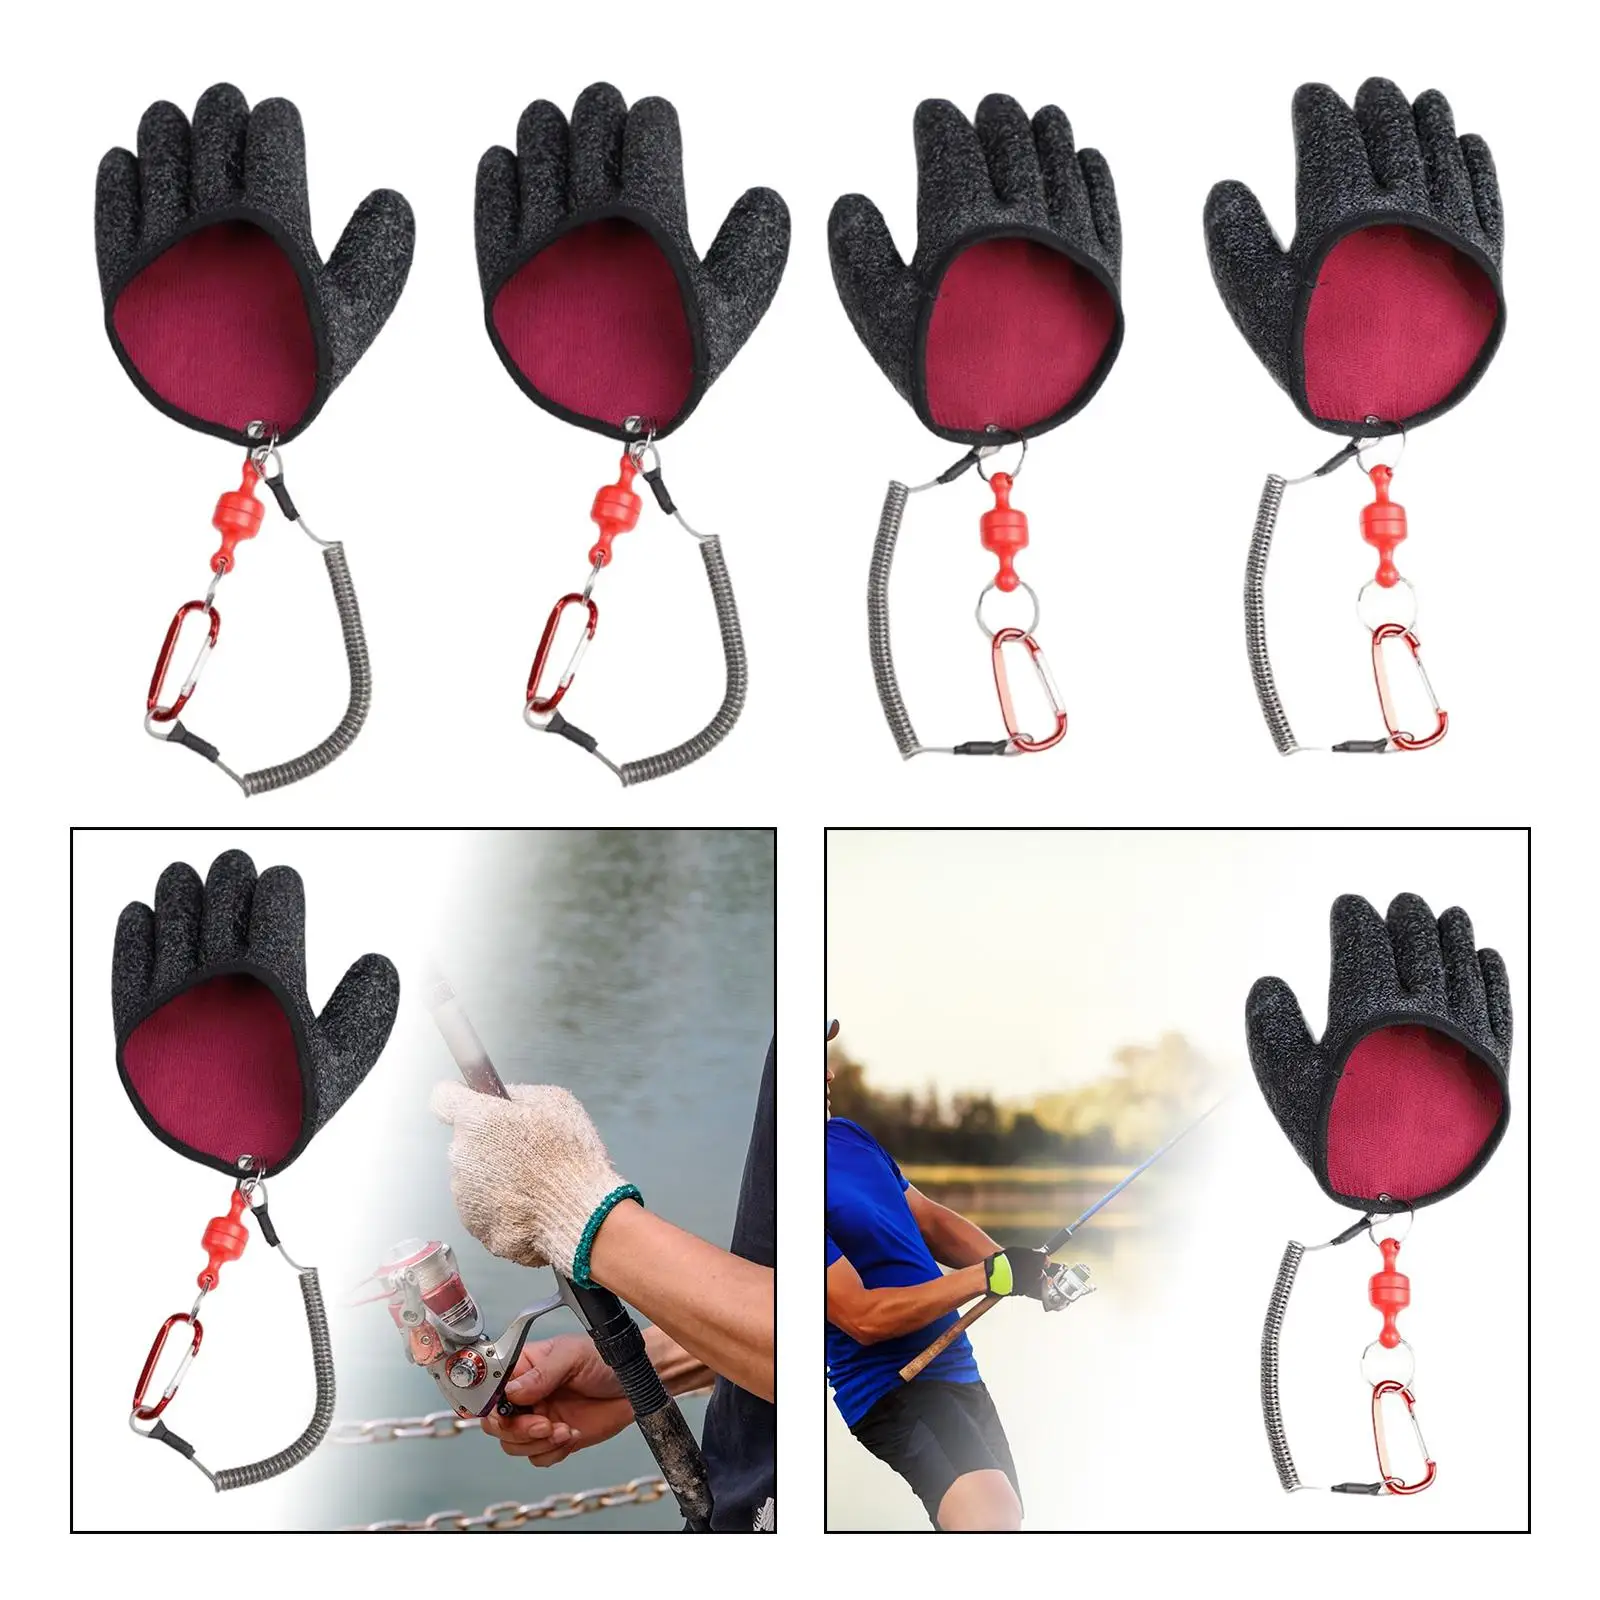 Fish Glove Nonslip Puncture Resistant Hunting Gloves Fishing Gloves Professional for Cleaning Catch Fish Outdoor Activities